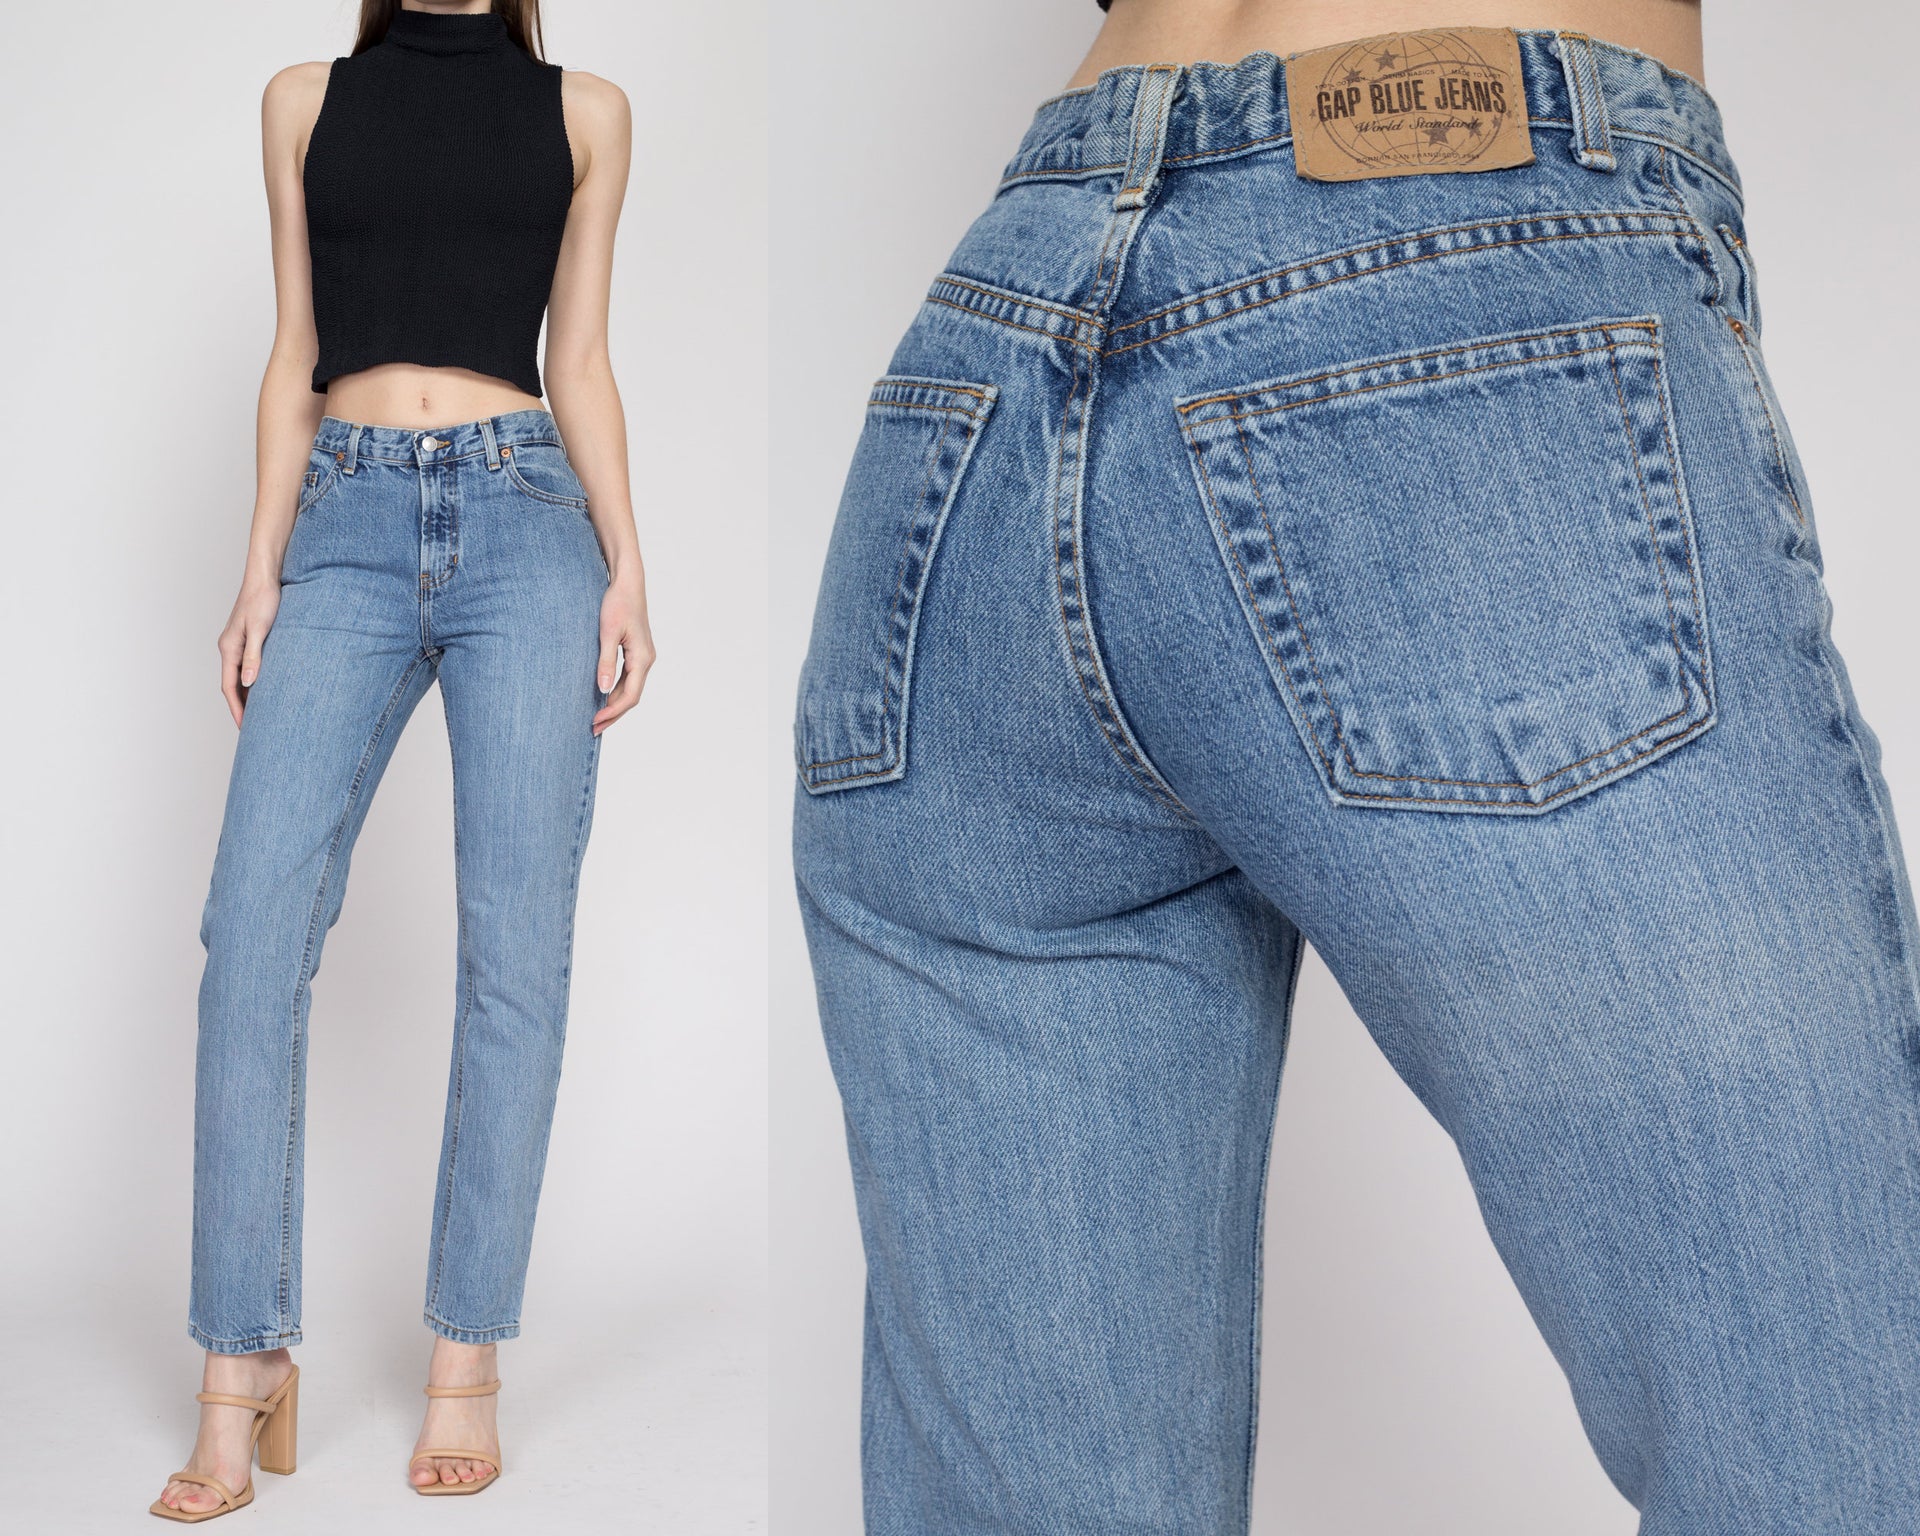 GAP launches new Sky High Rise denim jeans 